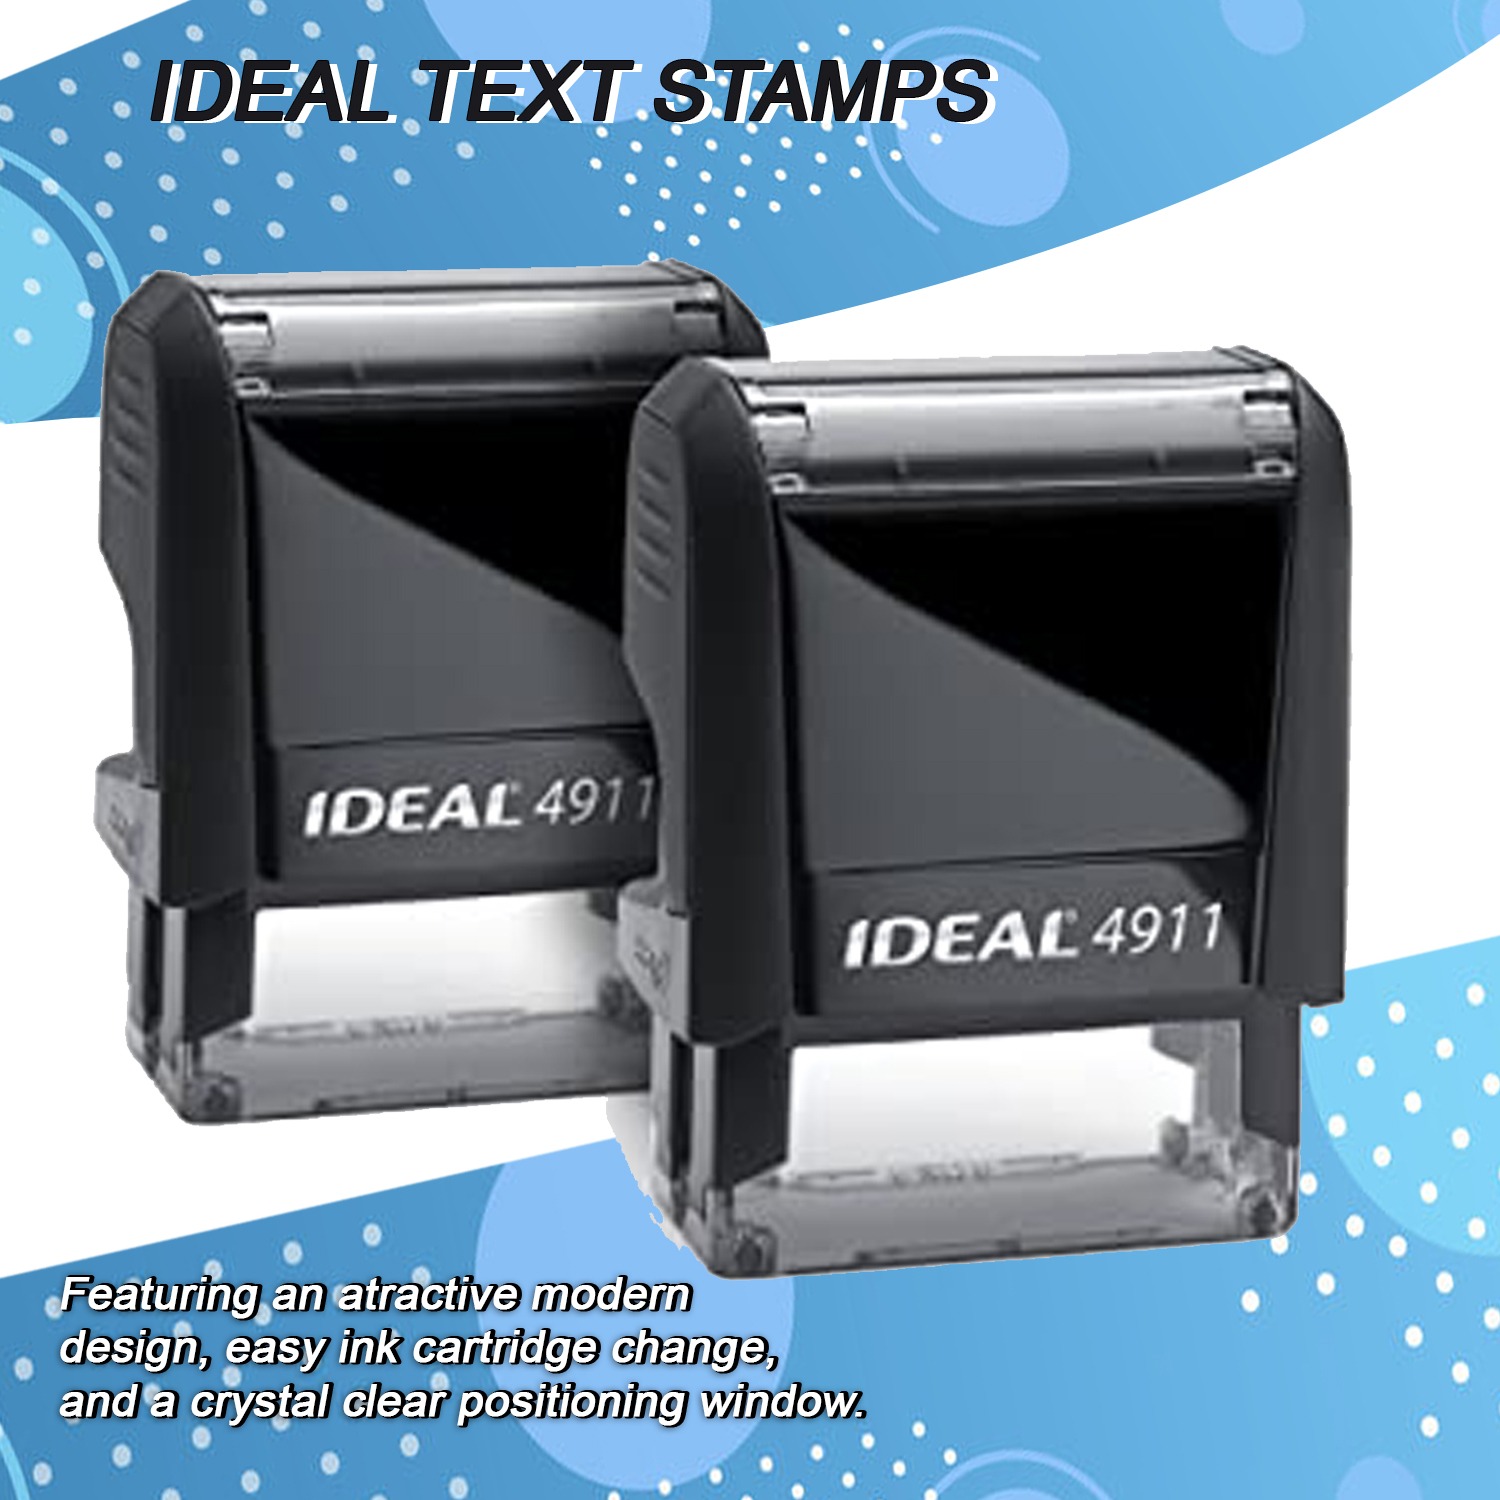 Create Your Own Modern Self-inking Stamp